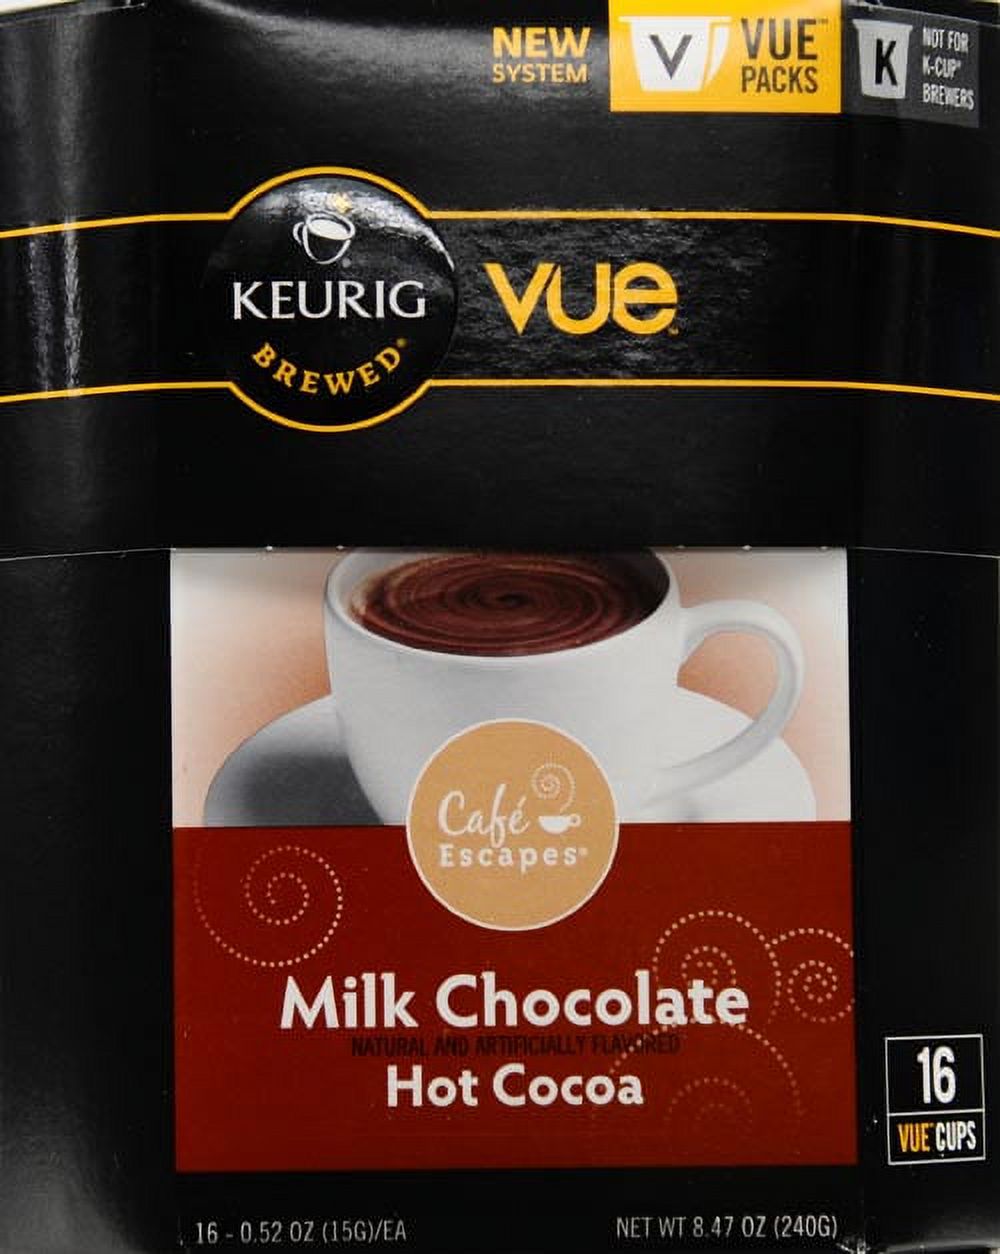 Keurig Vue Pack Cafe Escapes Milk Chocolate Hot Cocoa, 16ct - image 2 of 3